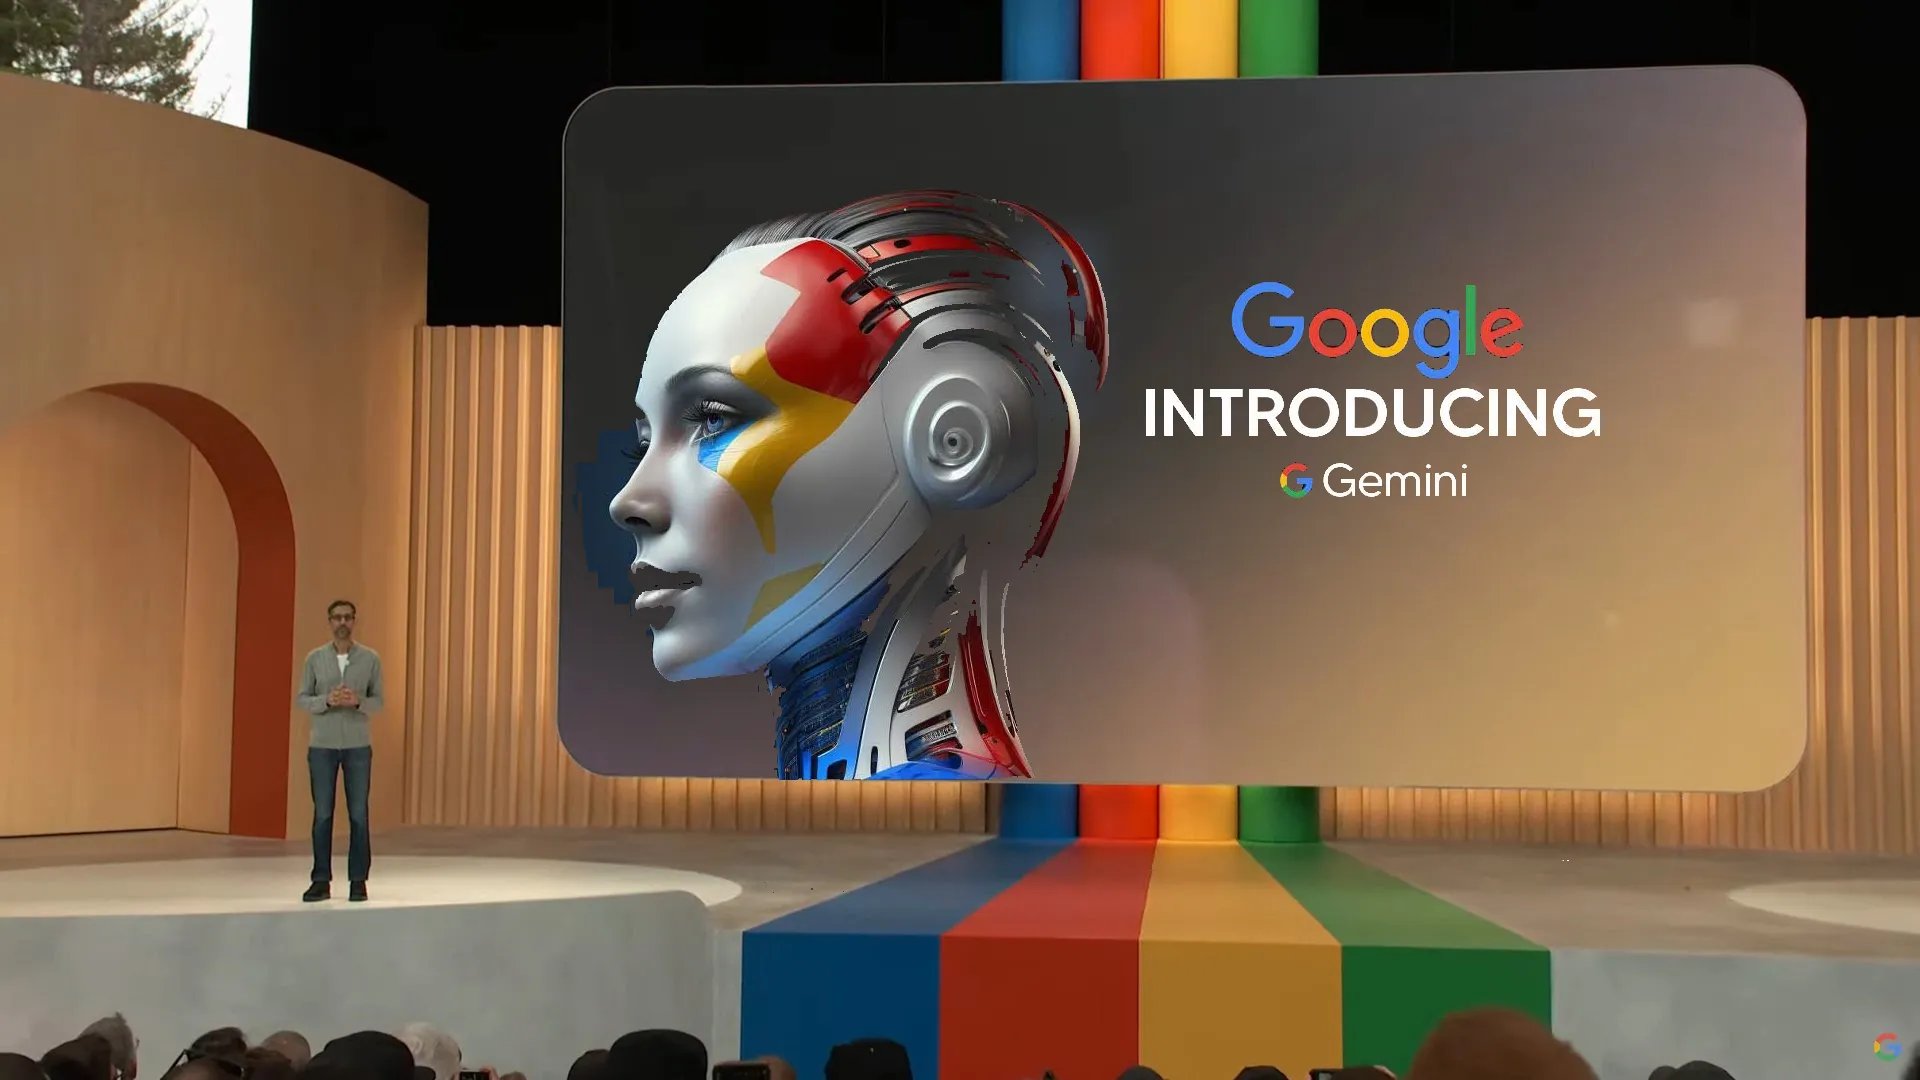 What Makes Google's Gemini the Nextlevel AI Model to Watch Out For?